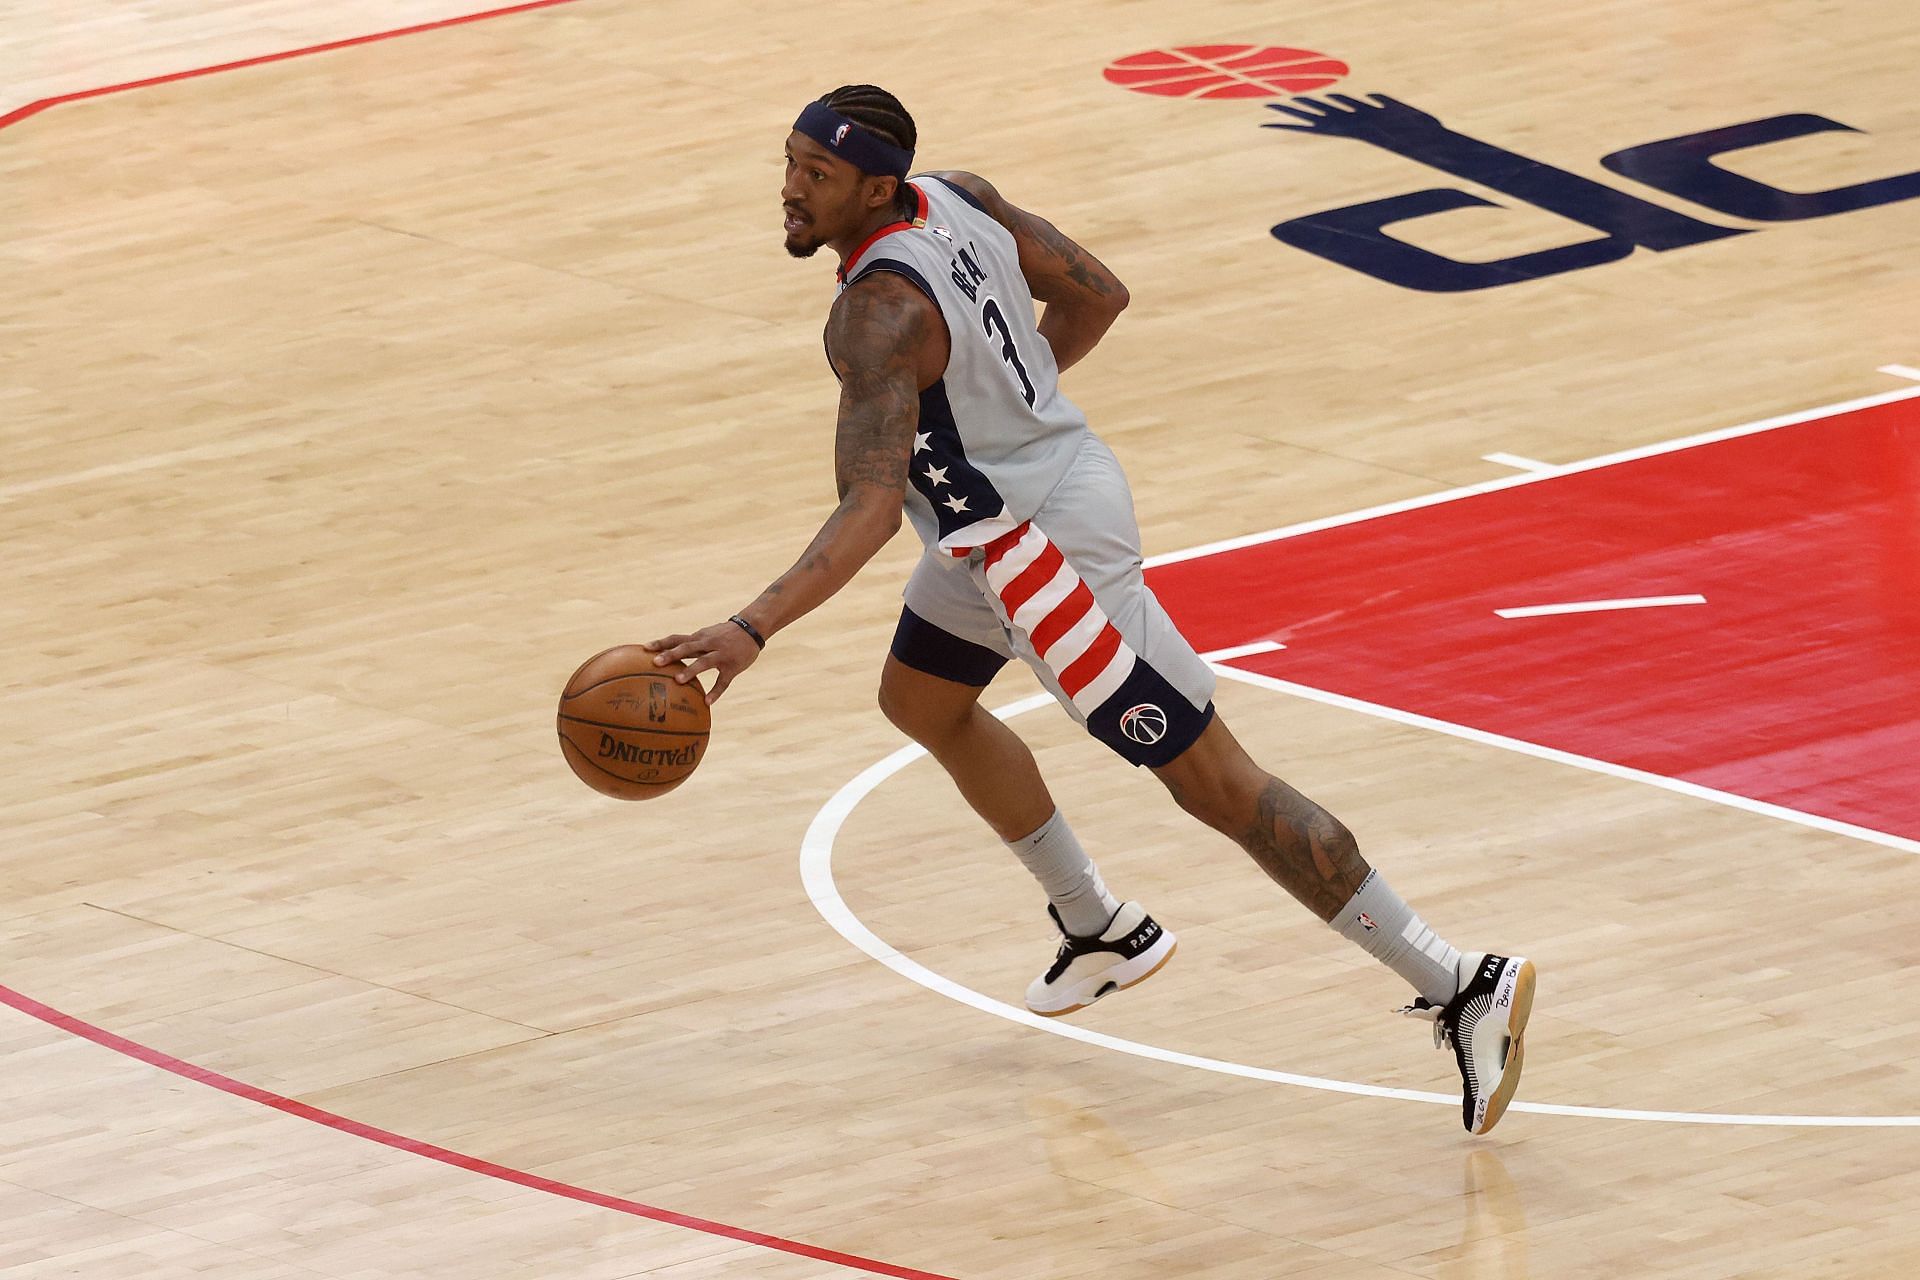 Bradley Beal #3 of the Washington Wizards dribbles the ball against the Philadelphia 76ers during Game Three of the Eastern Conference first round series at Capital One Arena on May 29, 2021 in Washington, DC.